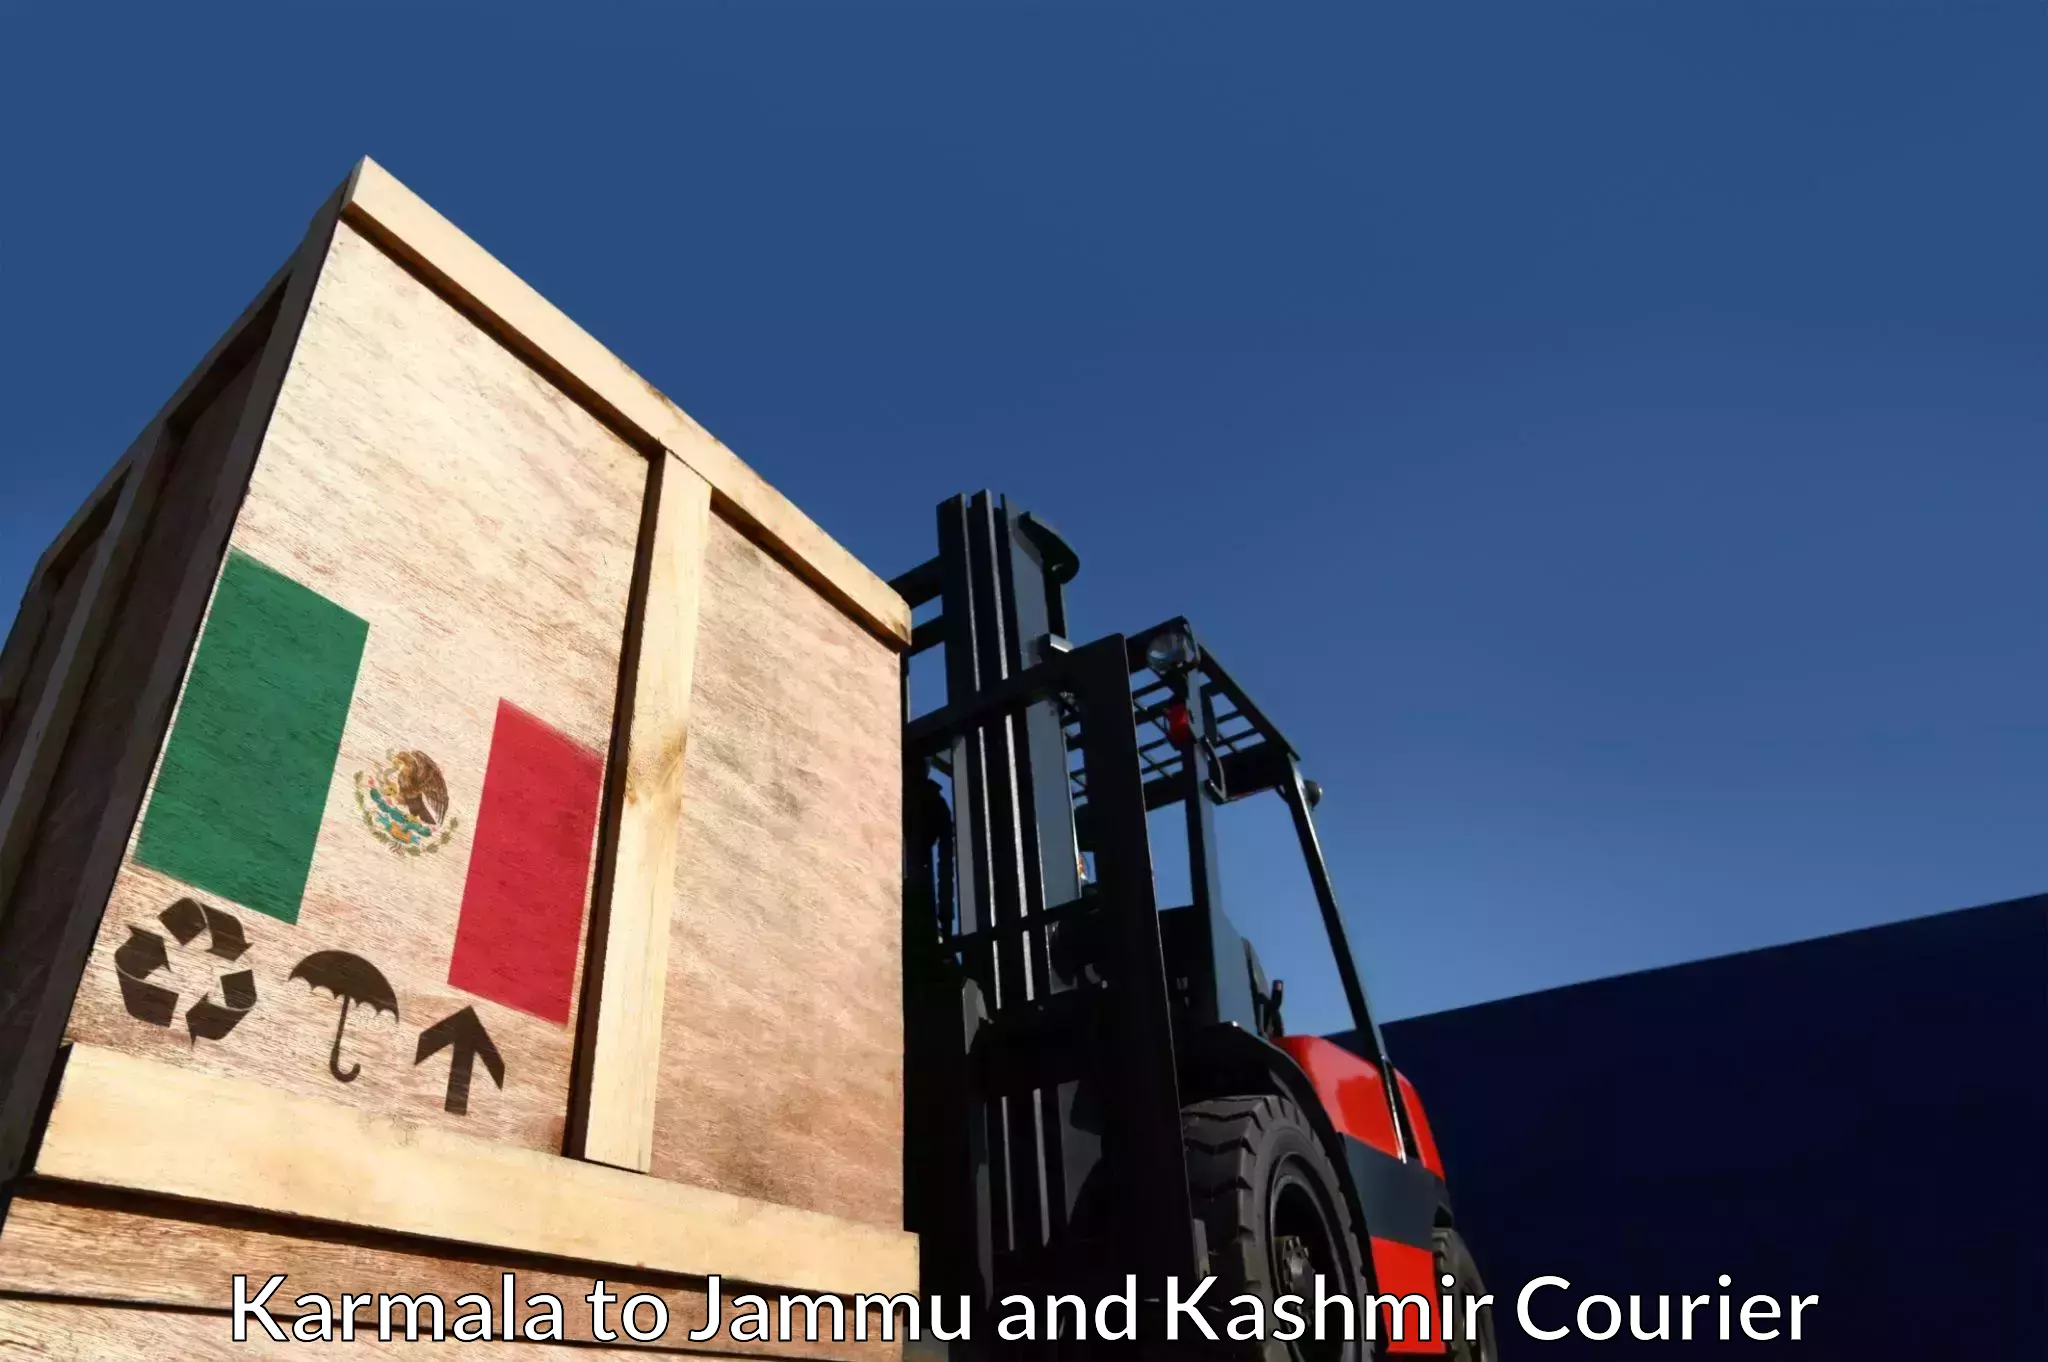 State-of-the-art courier technology Karmala to Jammu and Kashmir